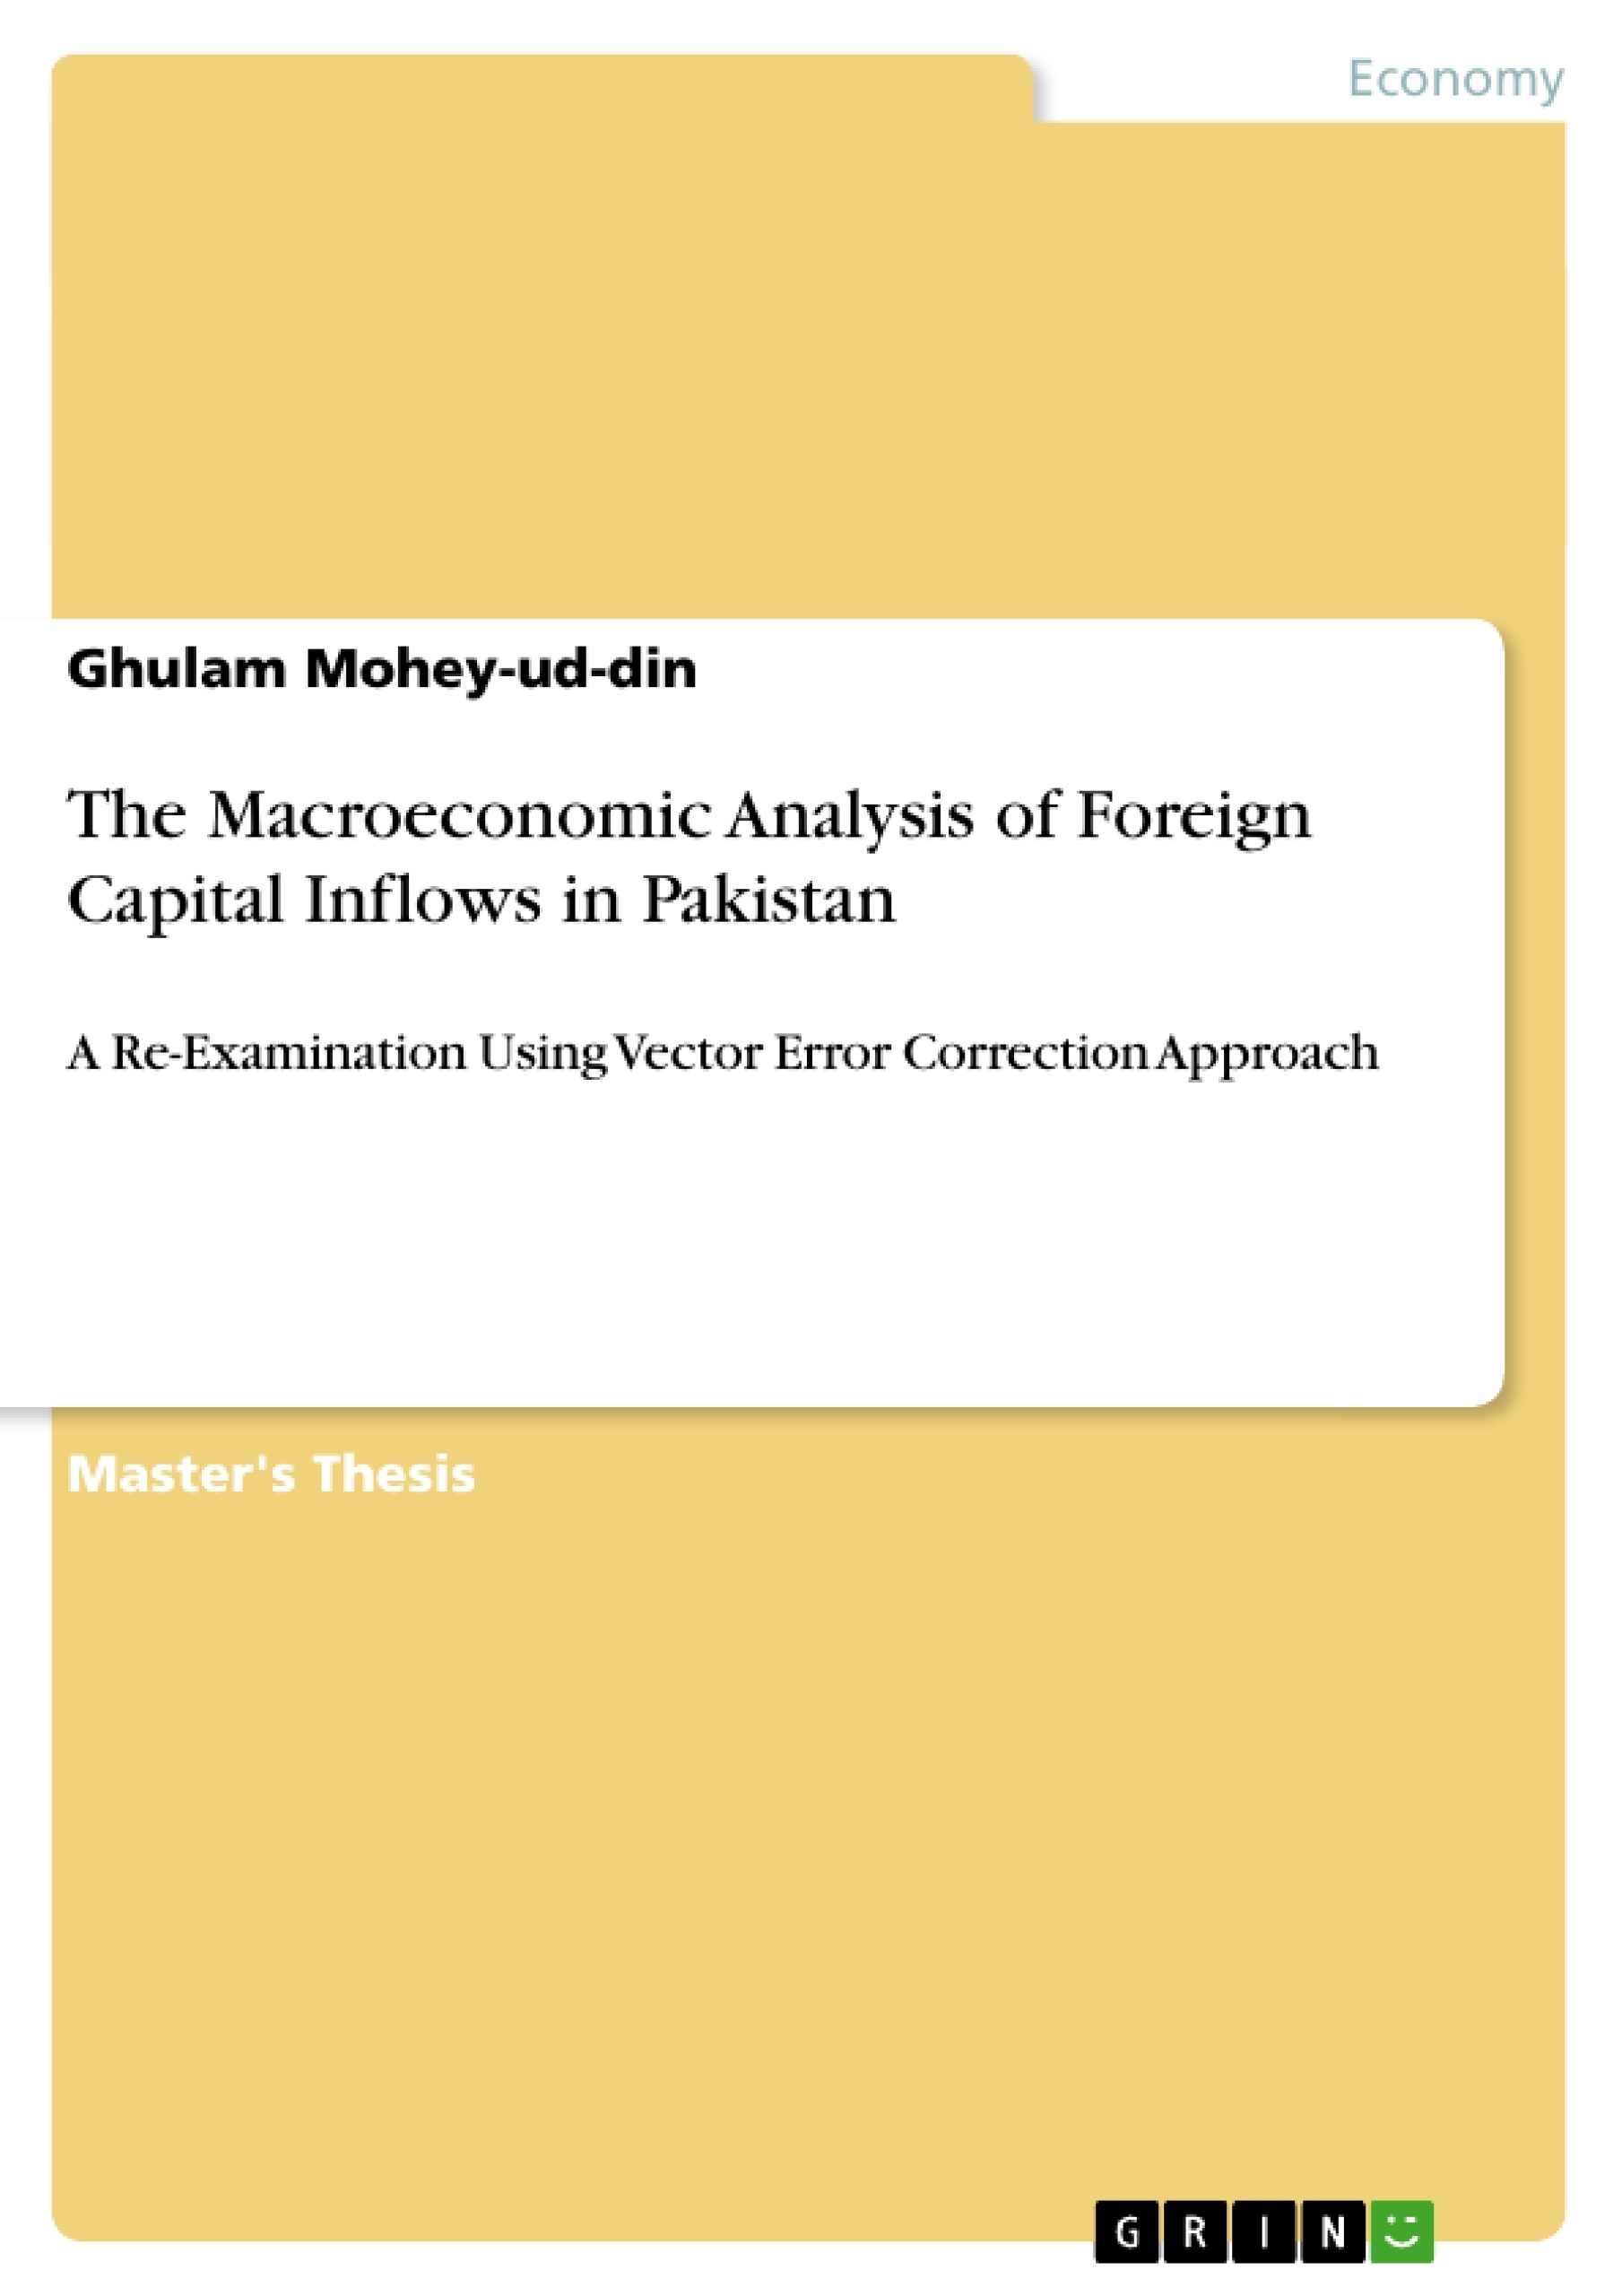 Title: The Macroeconomic Analysis of Foreign Capital Inflows in Pakistan